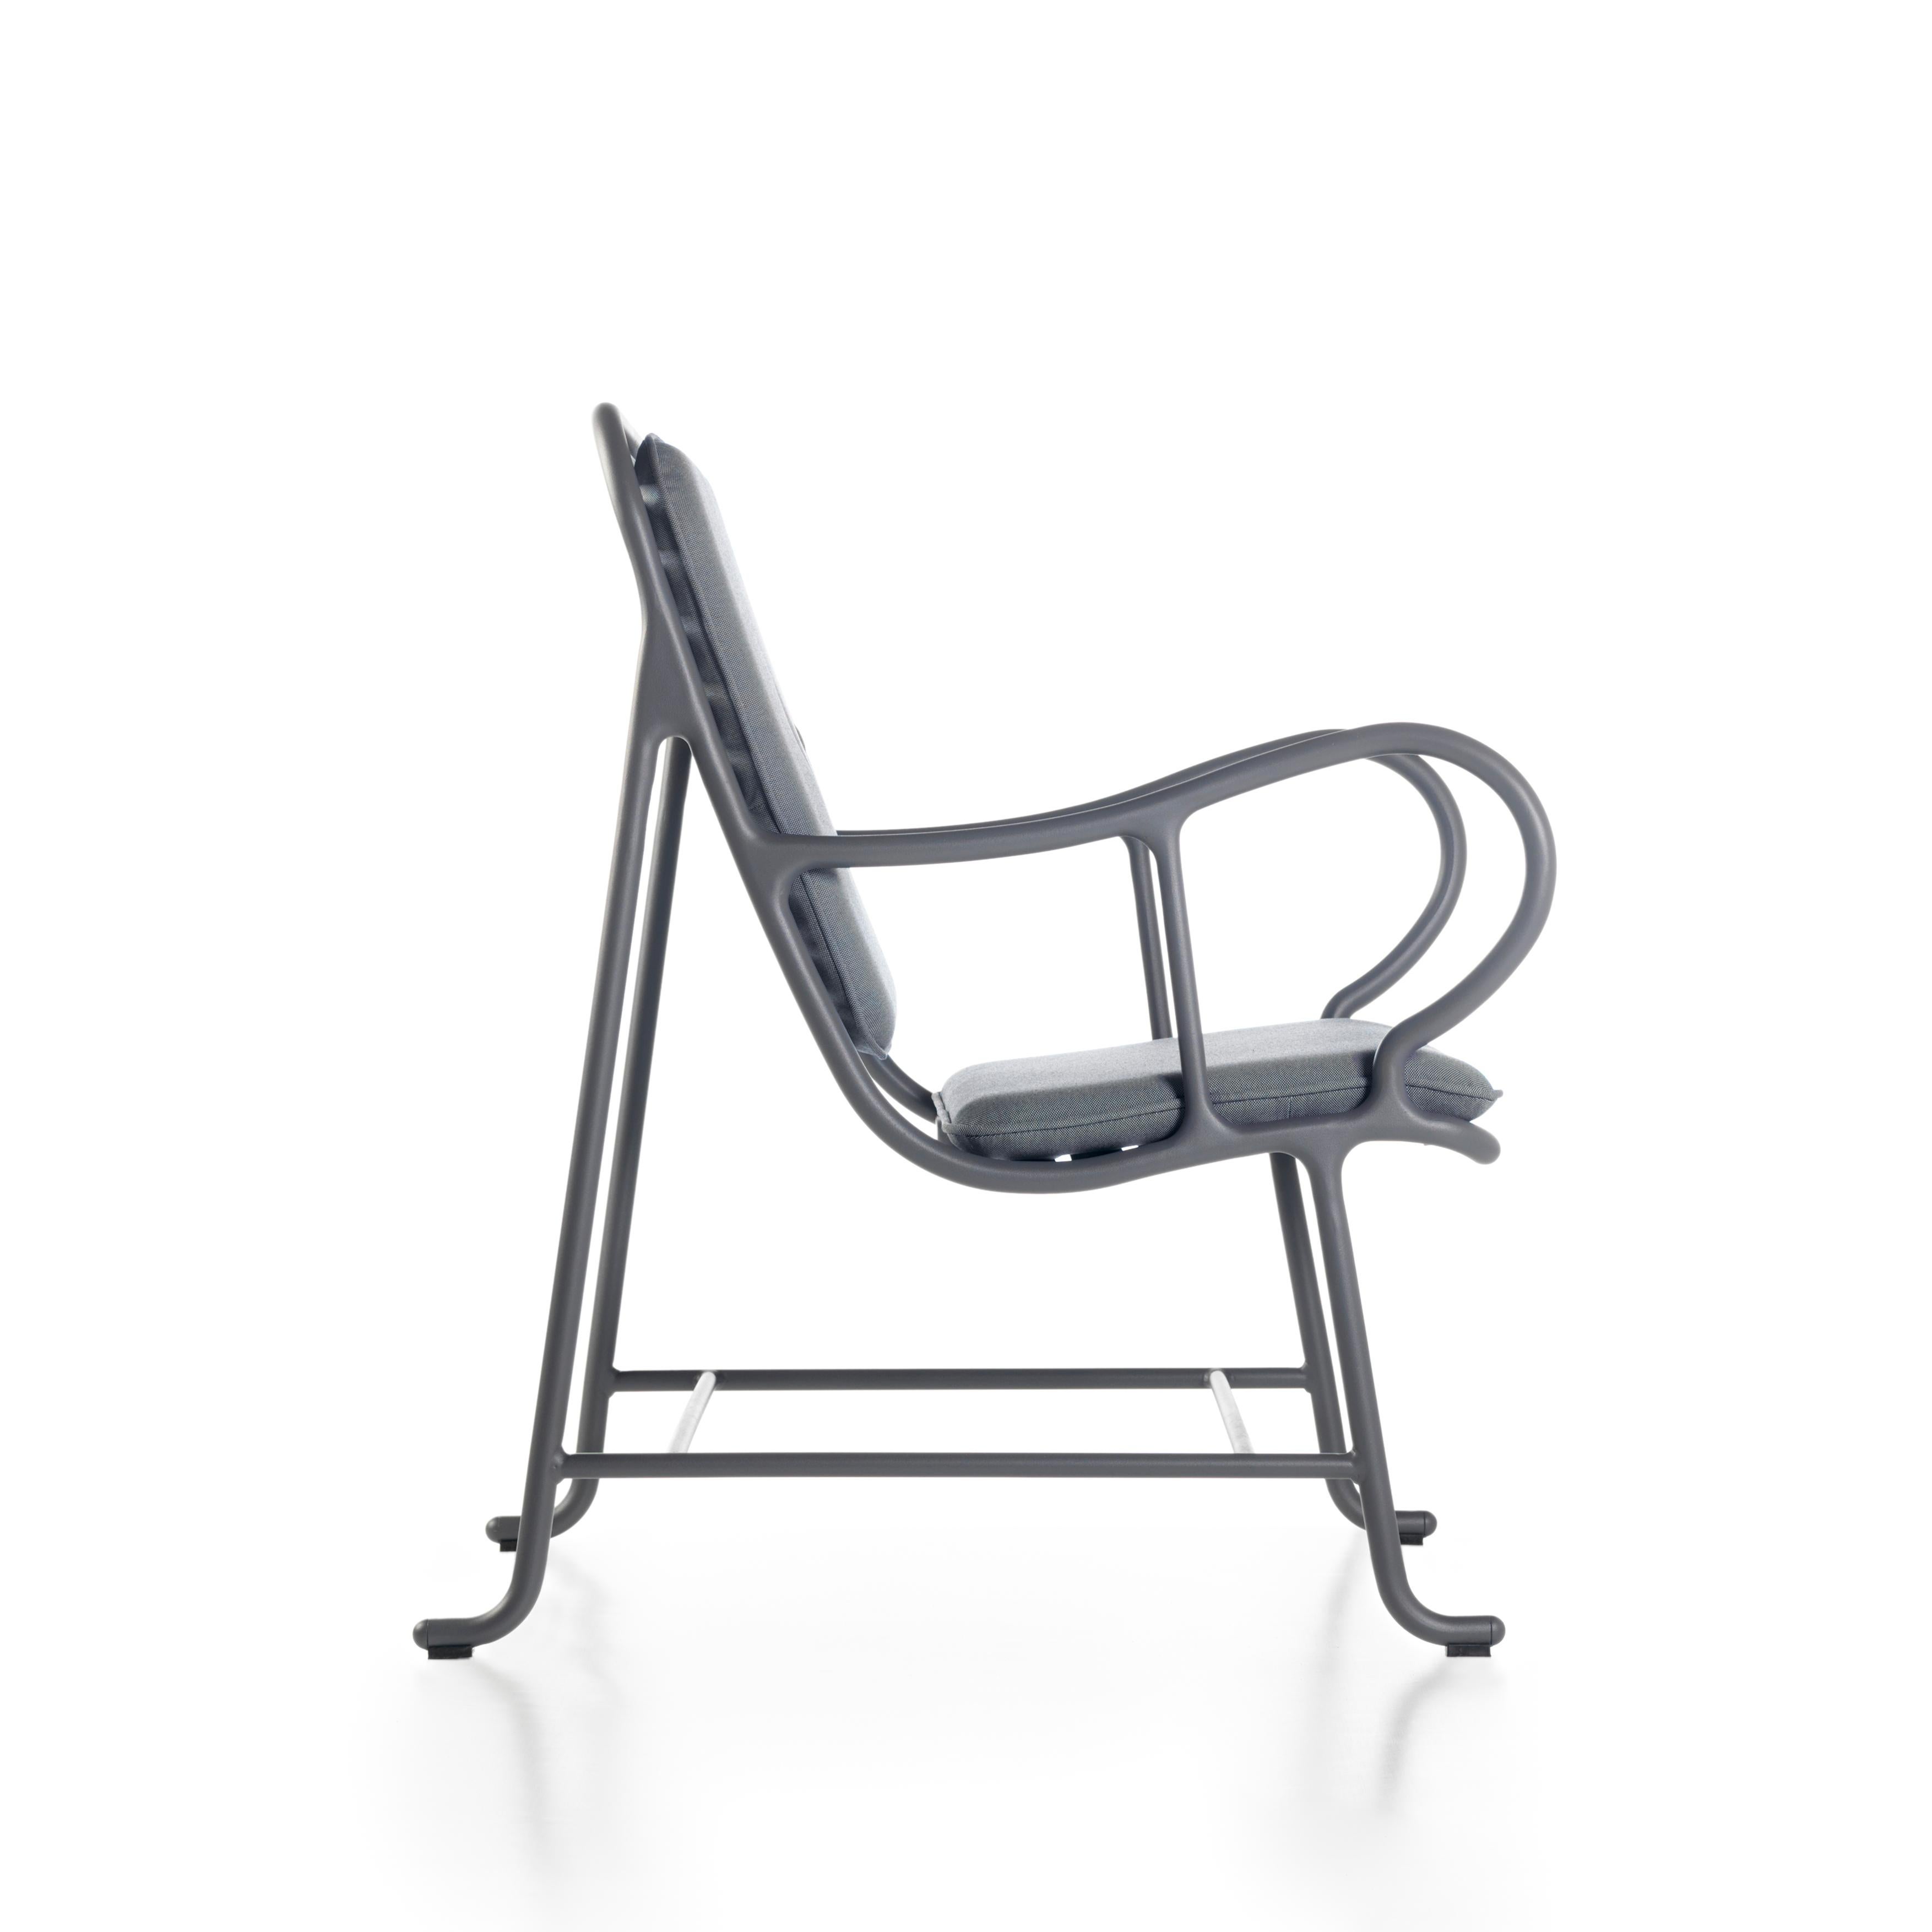 The Gardenias collection is the second largest collection by Jaime Hayon for BD.
Structure made of cast and extruded aluminium. Powder-coated grey (RAL 7015) with Alesta by Axalta. 

Removable upholstery and removable cushion covers, waterproof